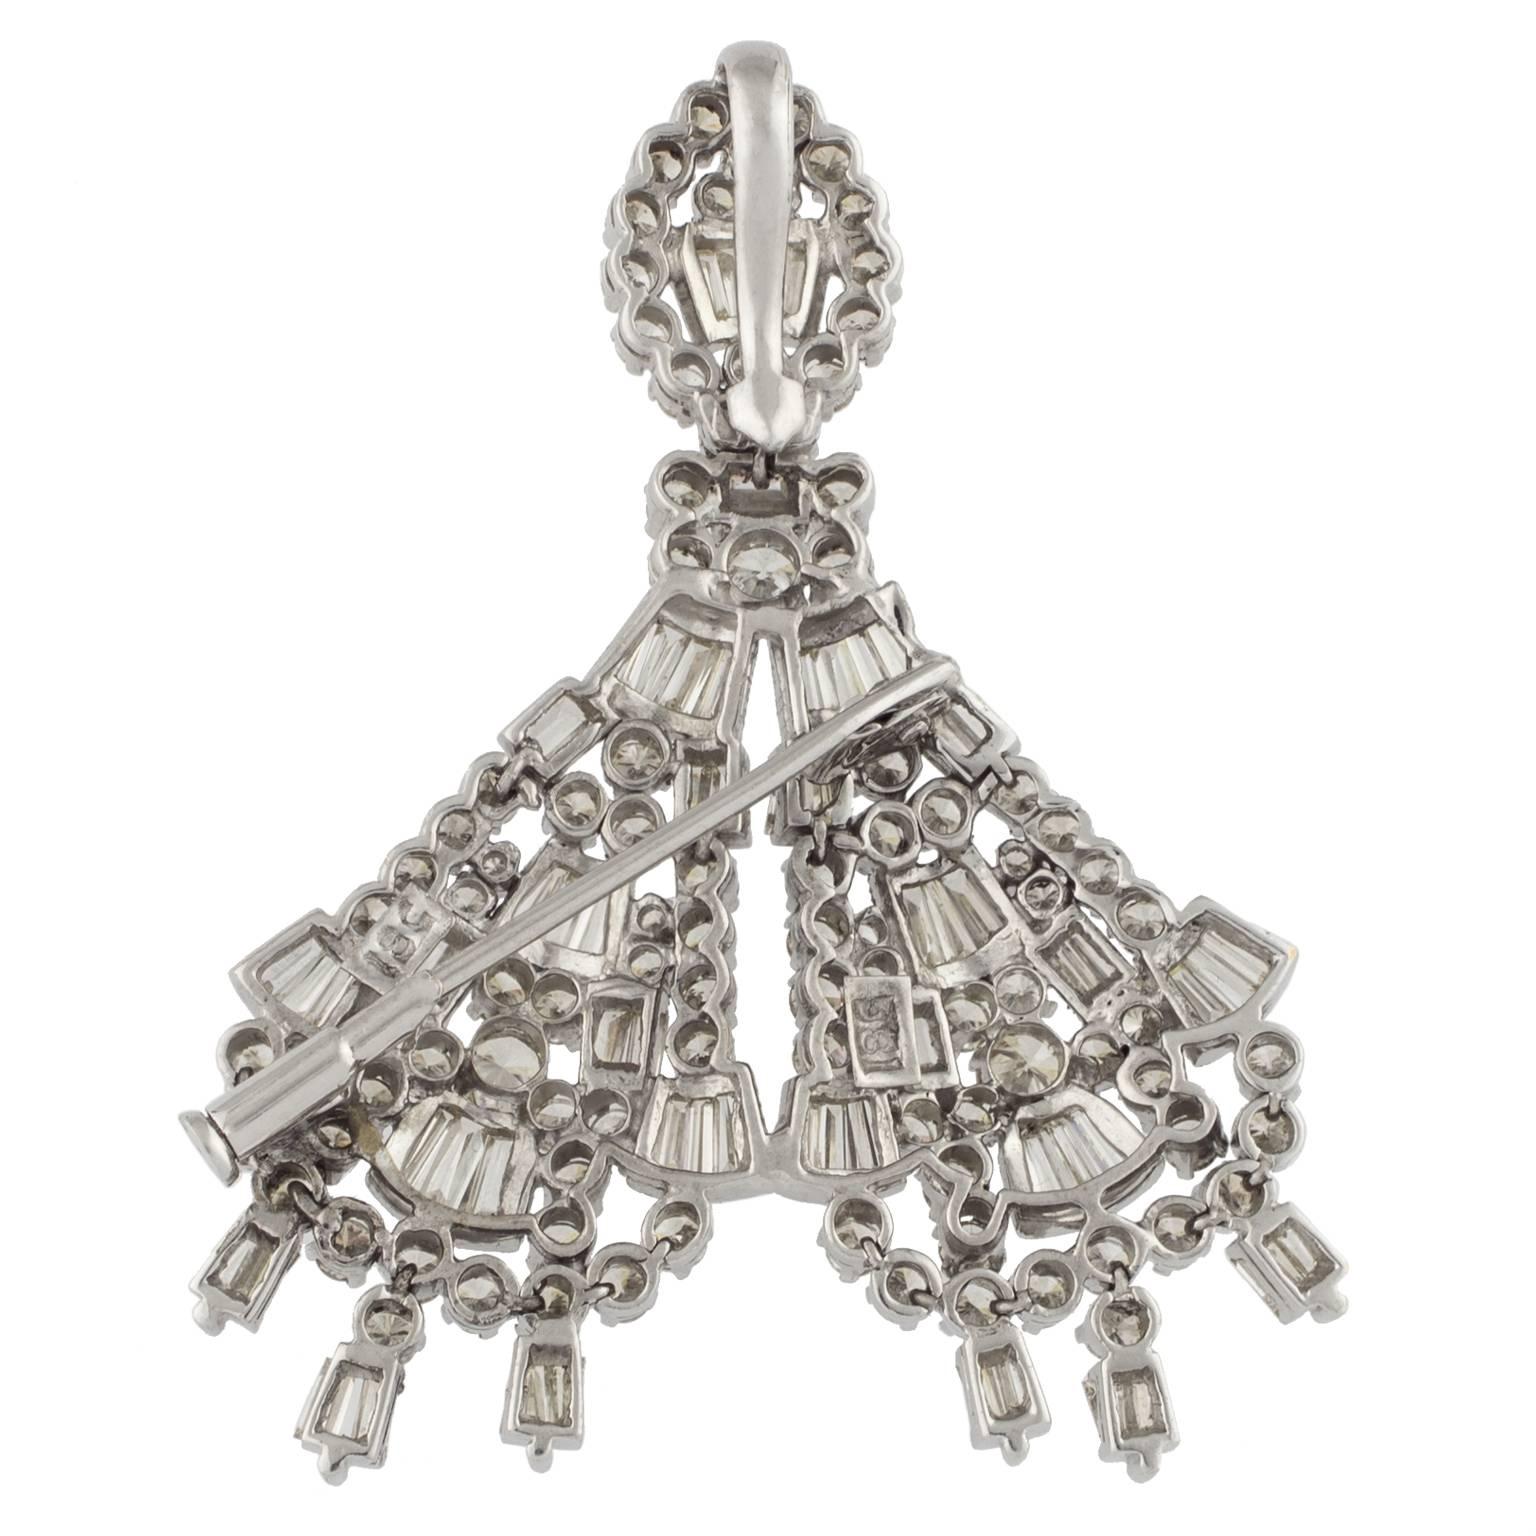 Brooch-pendant in white gold, set with 104 round brilliant cut diamonds with a total of 3.64 carats in weigth, and 65 tapered baguette cut diamonds, with a total weight of 2.27 carats.
Approximate dimensions: 55 x 40 mm (2.17 x 1.57 in)